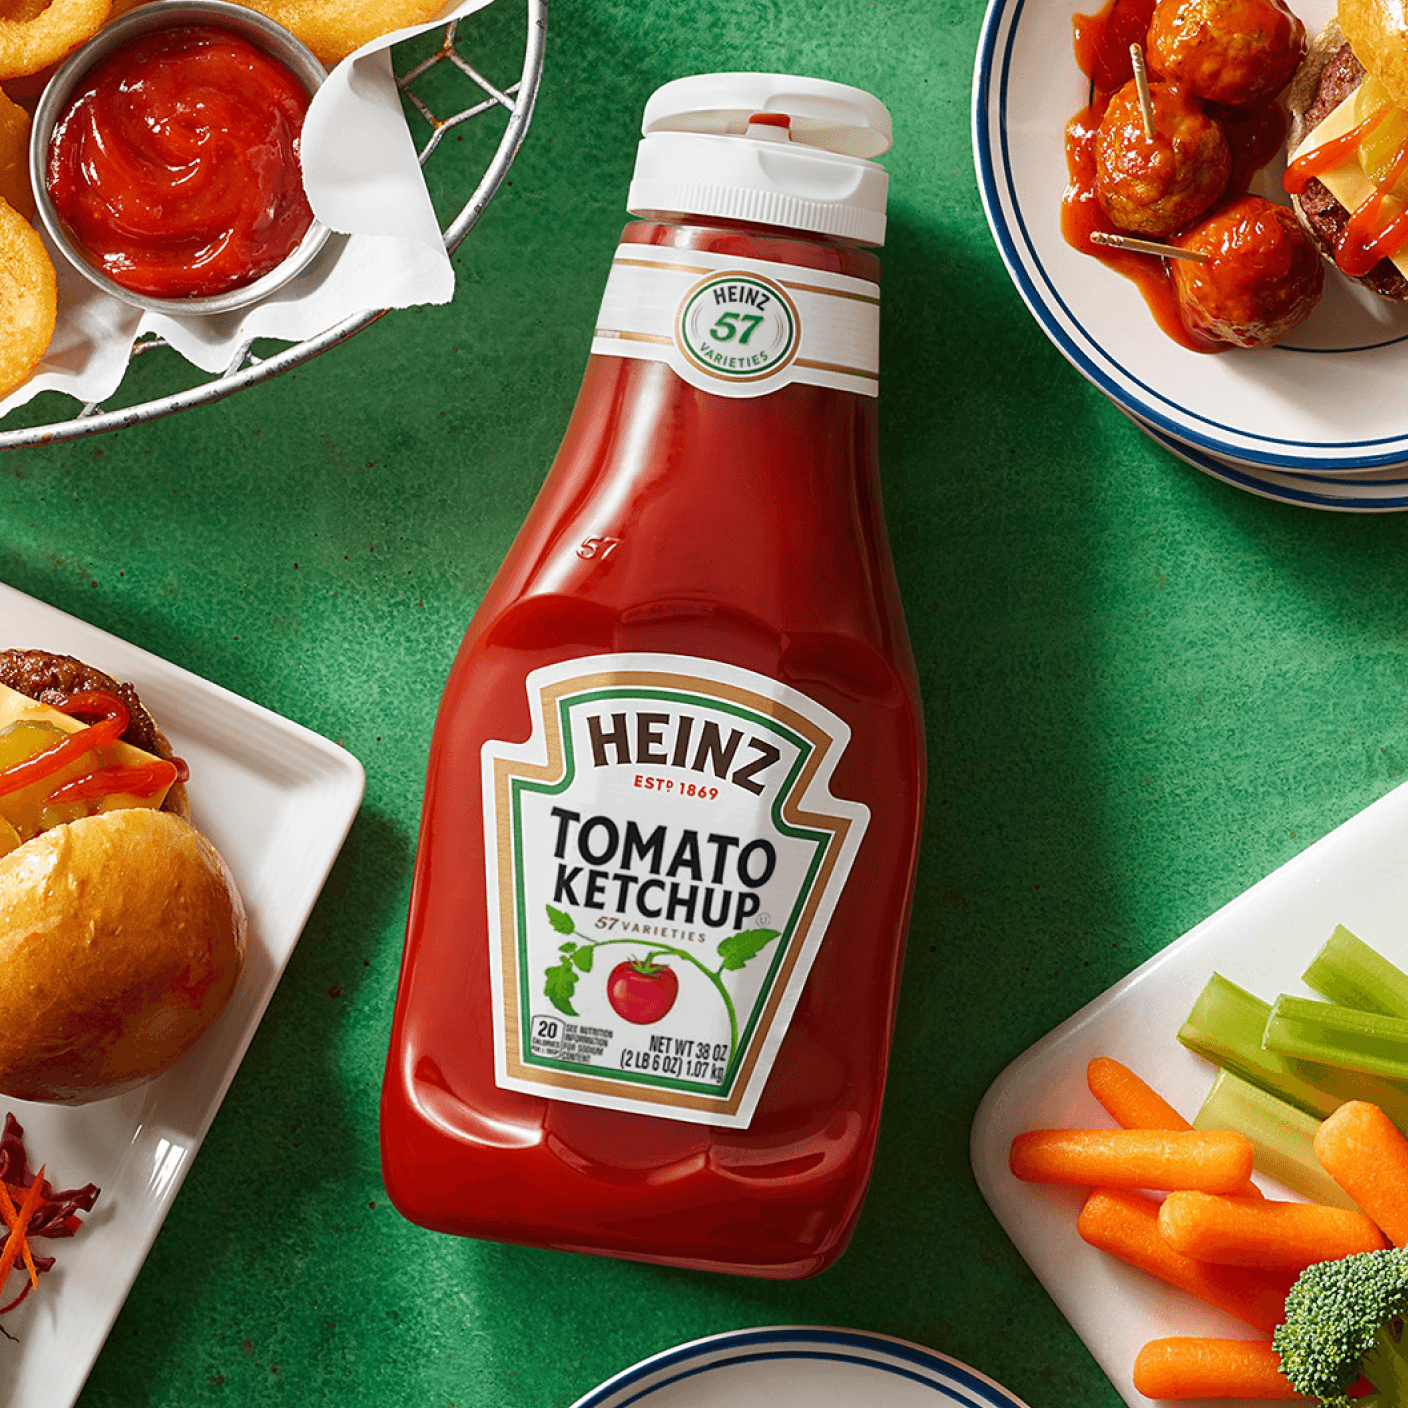 A Heinz ketchup bottle on a table viewed from above.